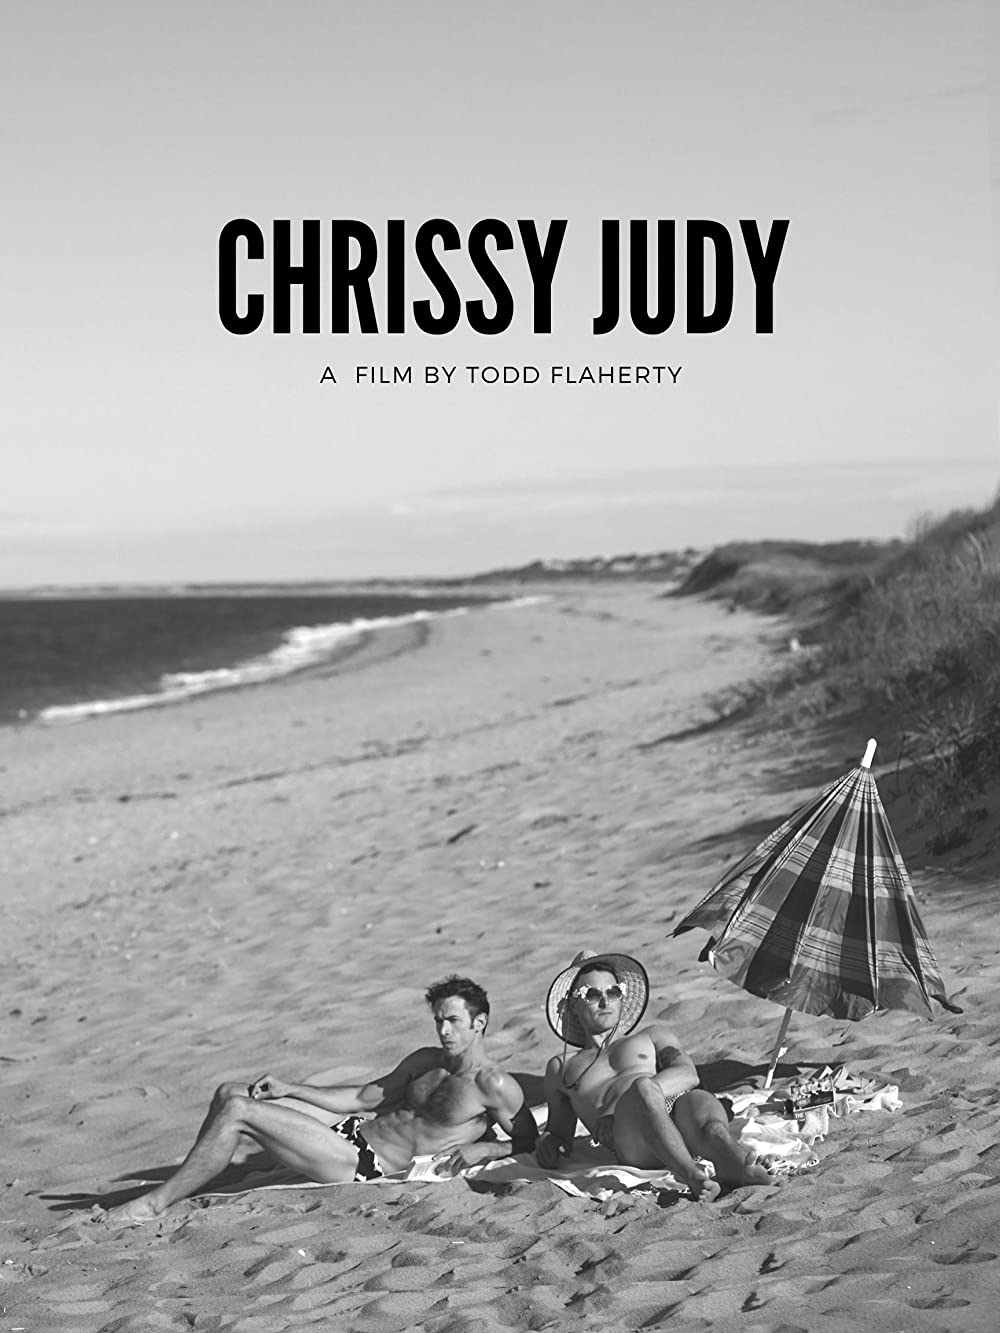 Beach Nude Jamaica - Chrissy Judy: A Film Review - The Gay & Lesbian Review